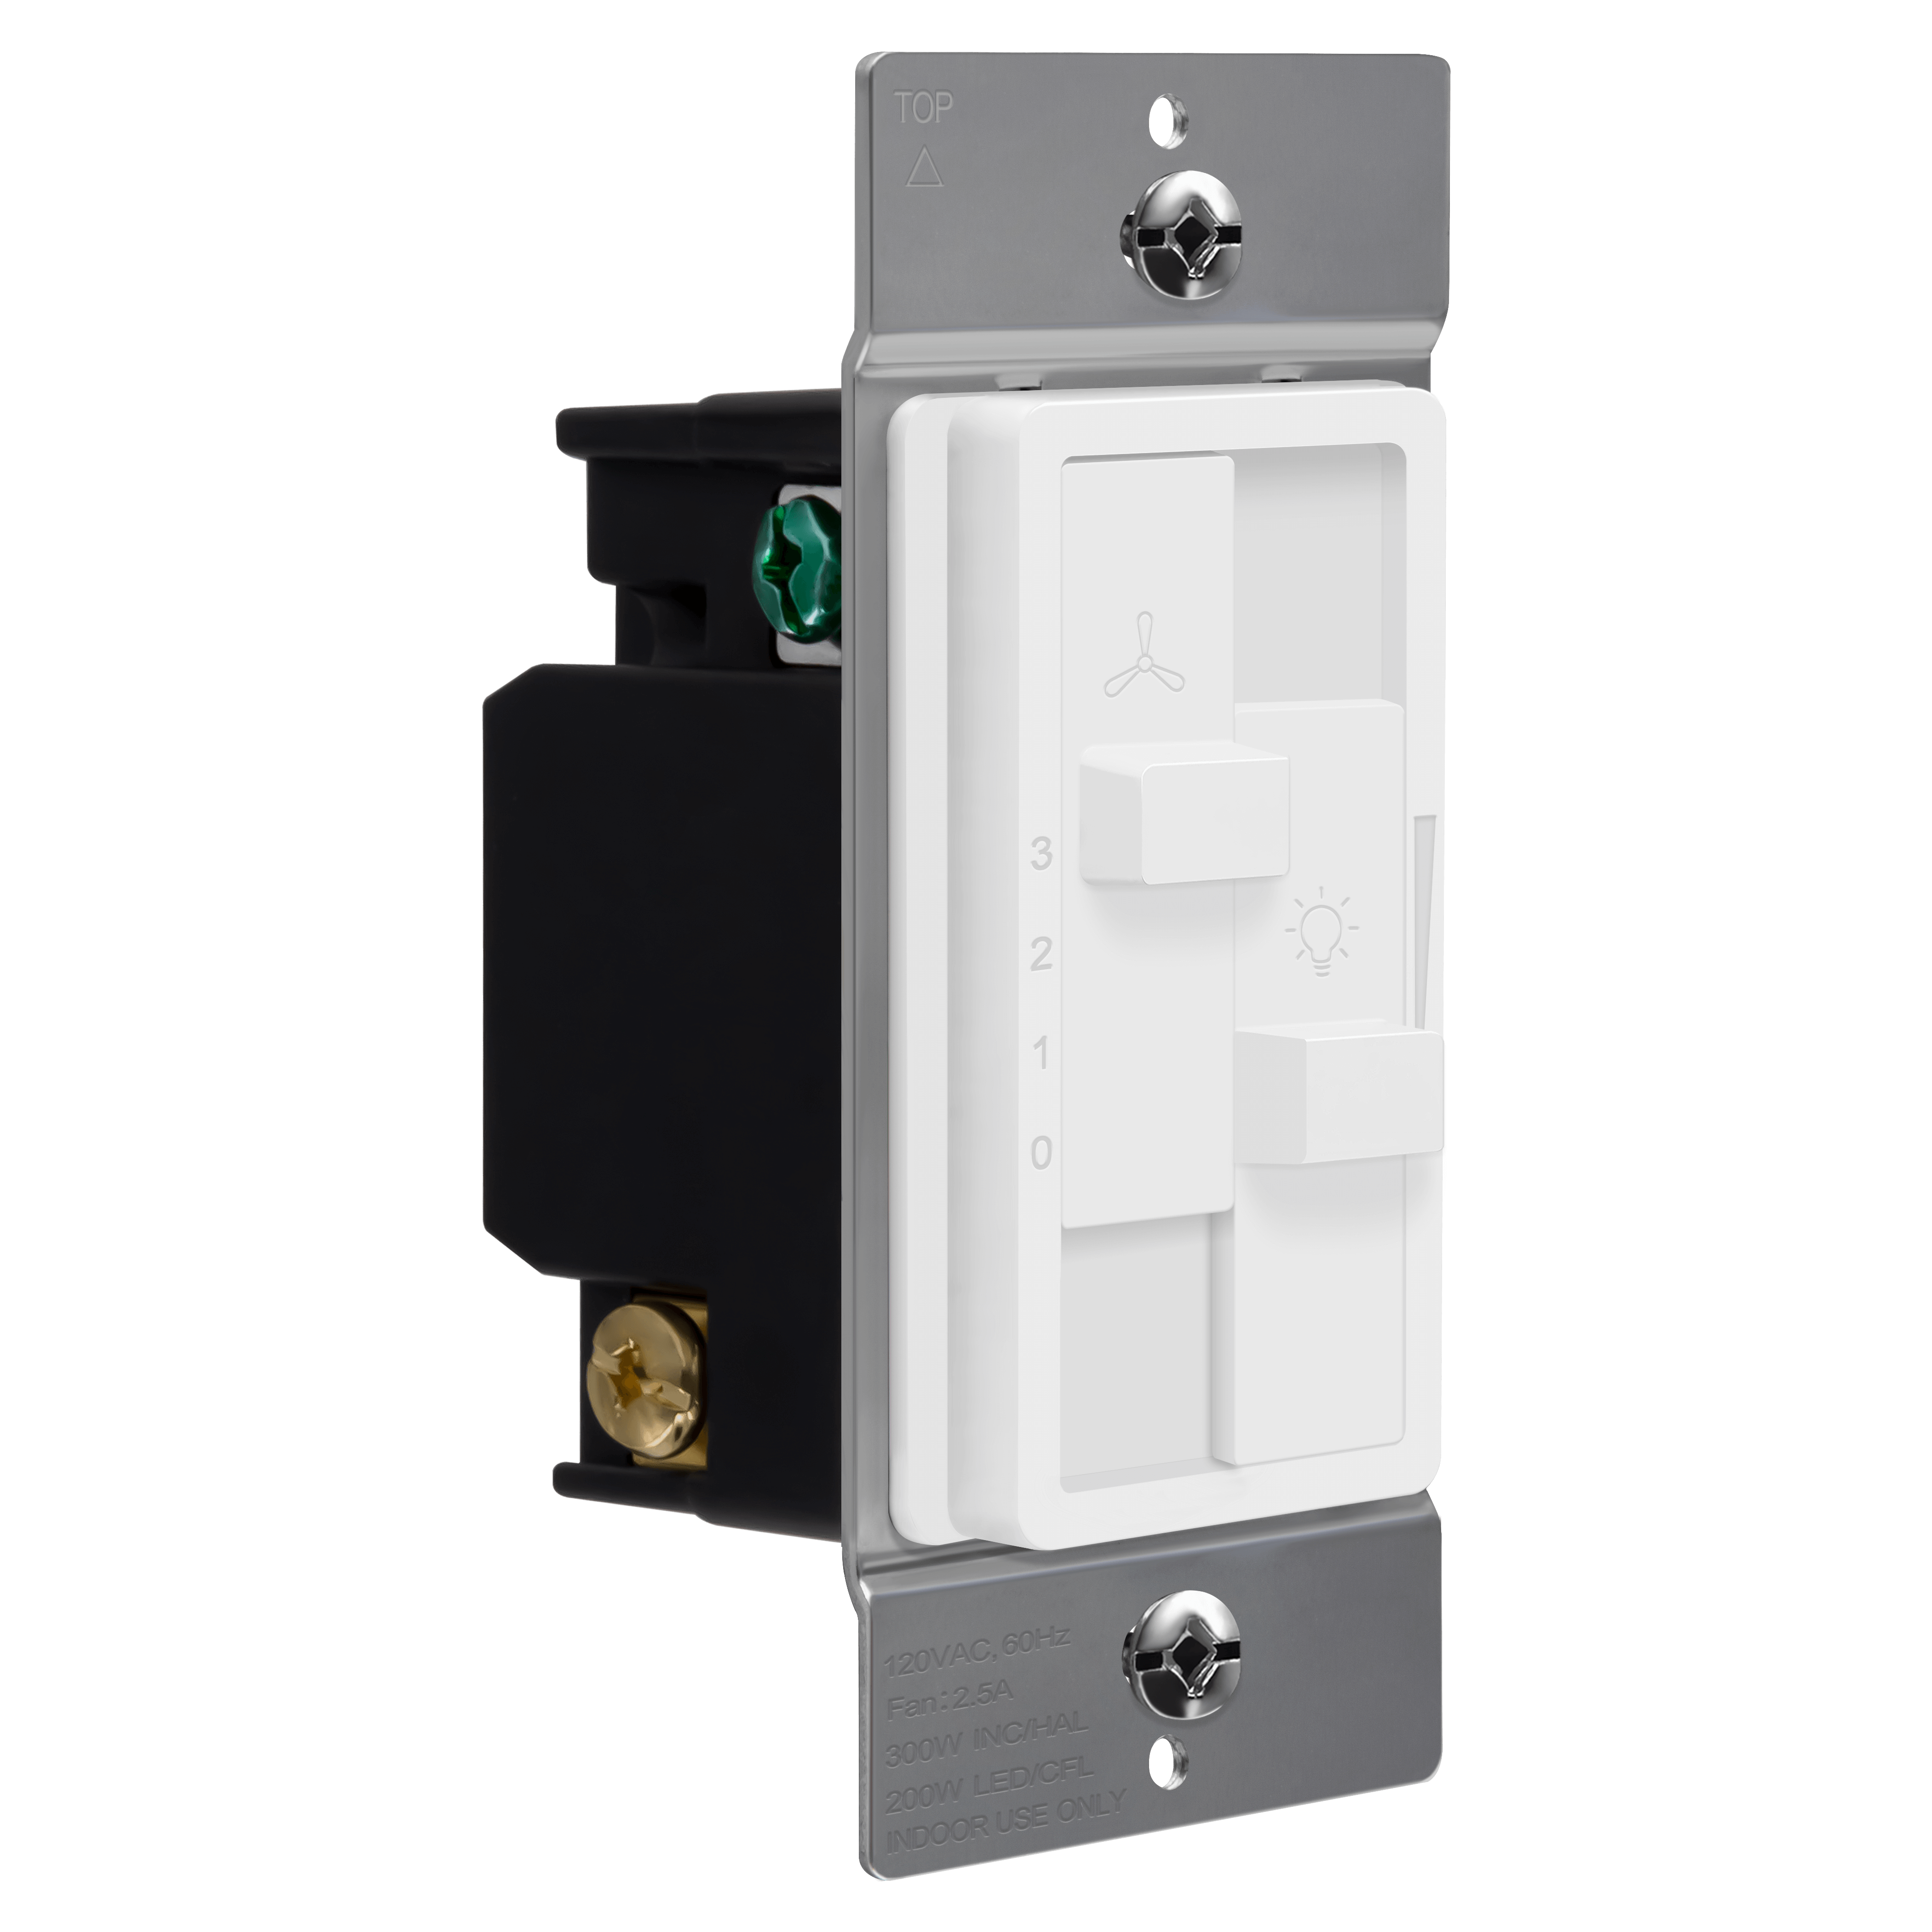 Kalide Combo Dimmer Switch with 3-Speed Fan Control